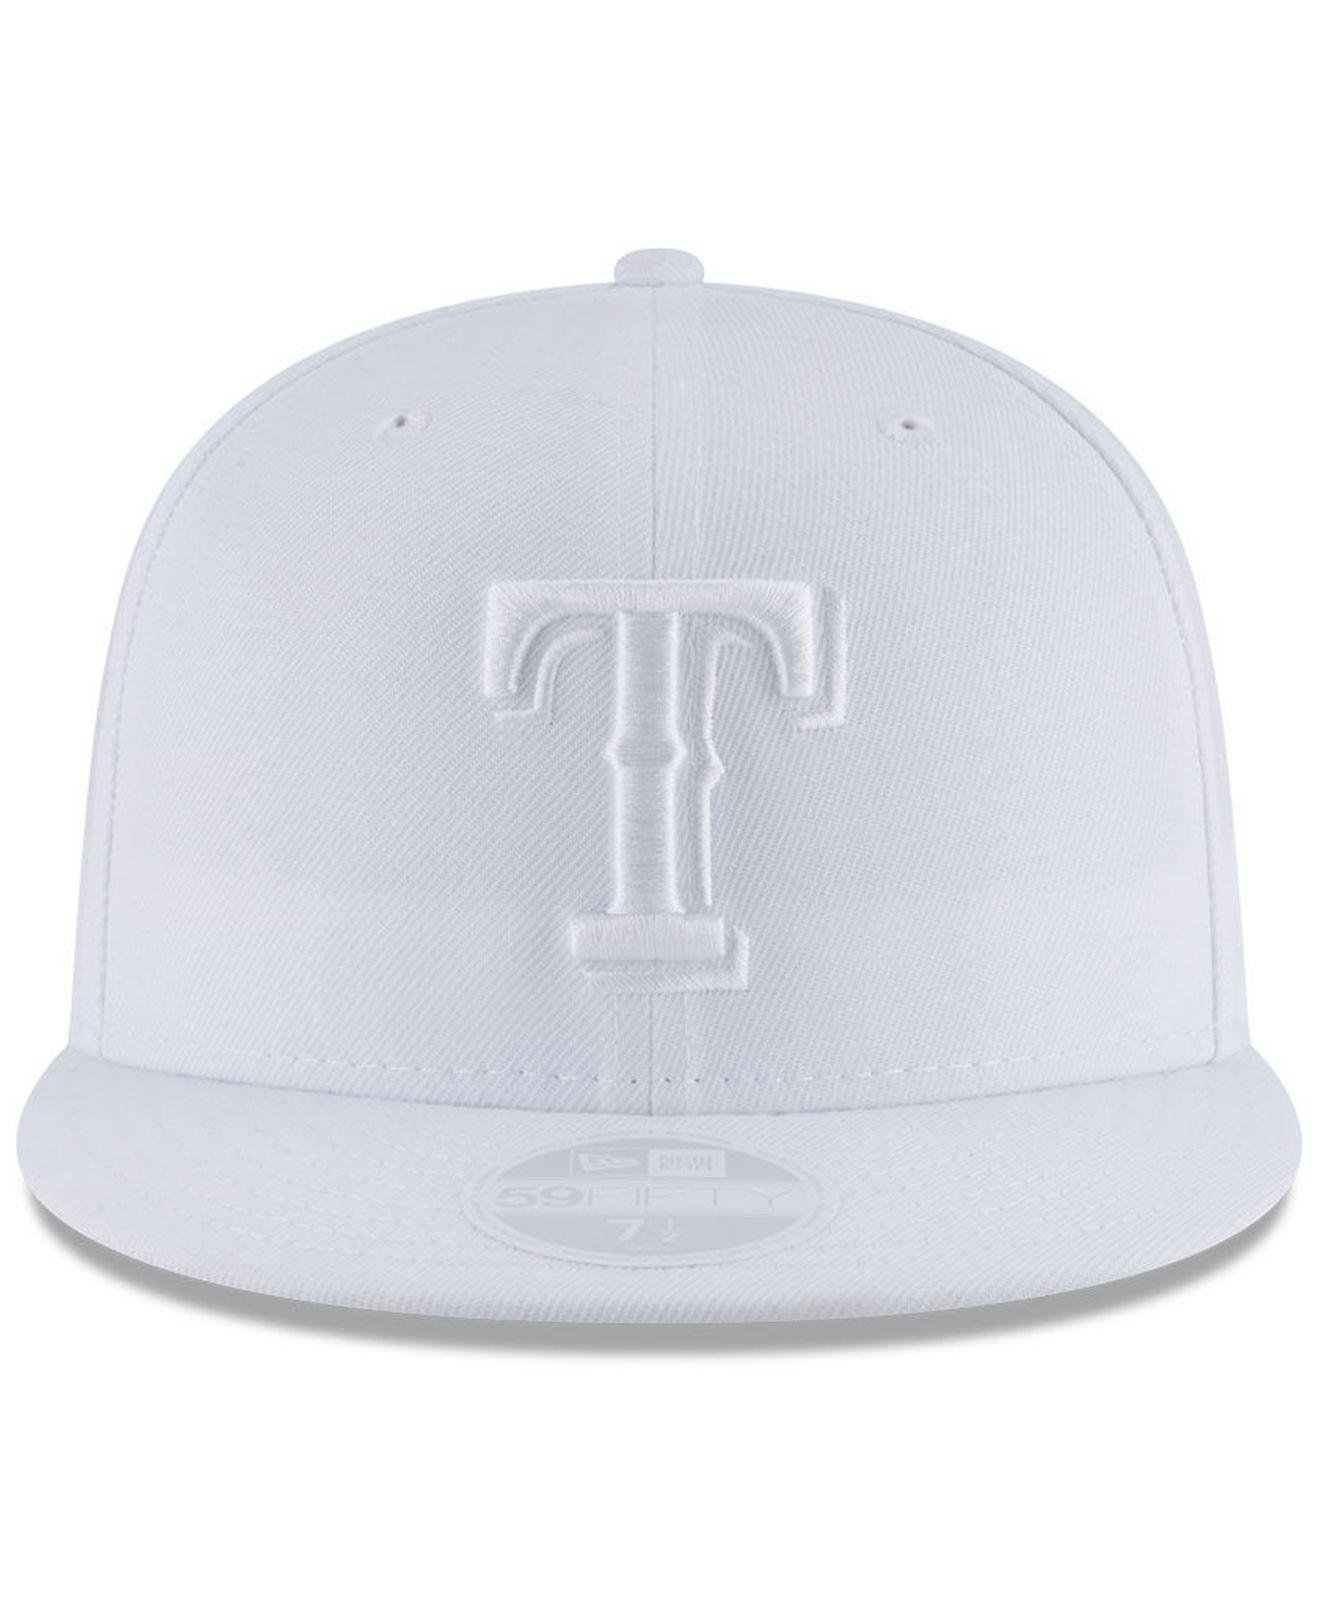 KTZ Texas Rangers White Out 59fifty Fitted Cap for Men